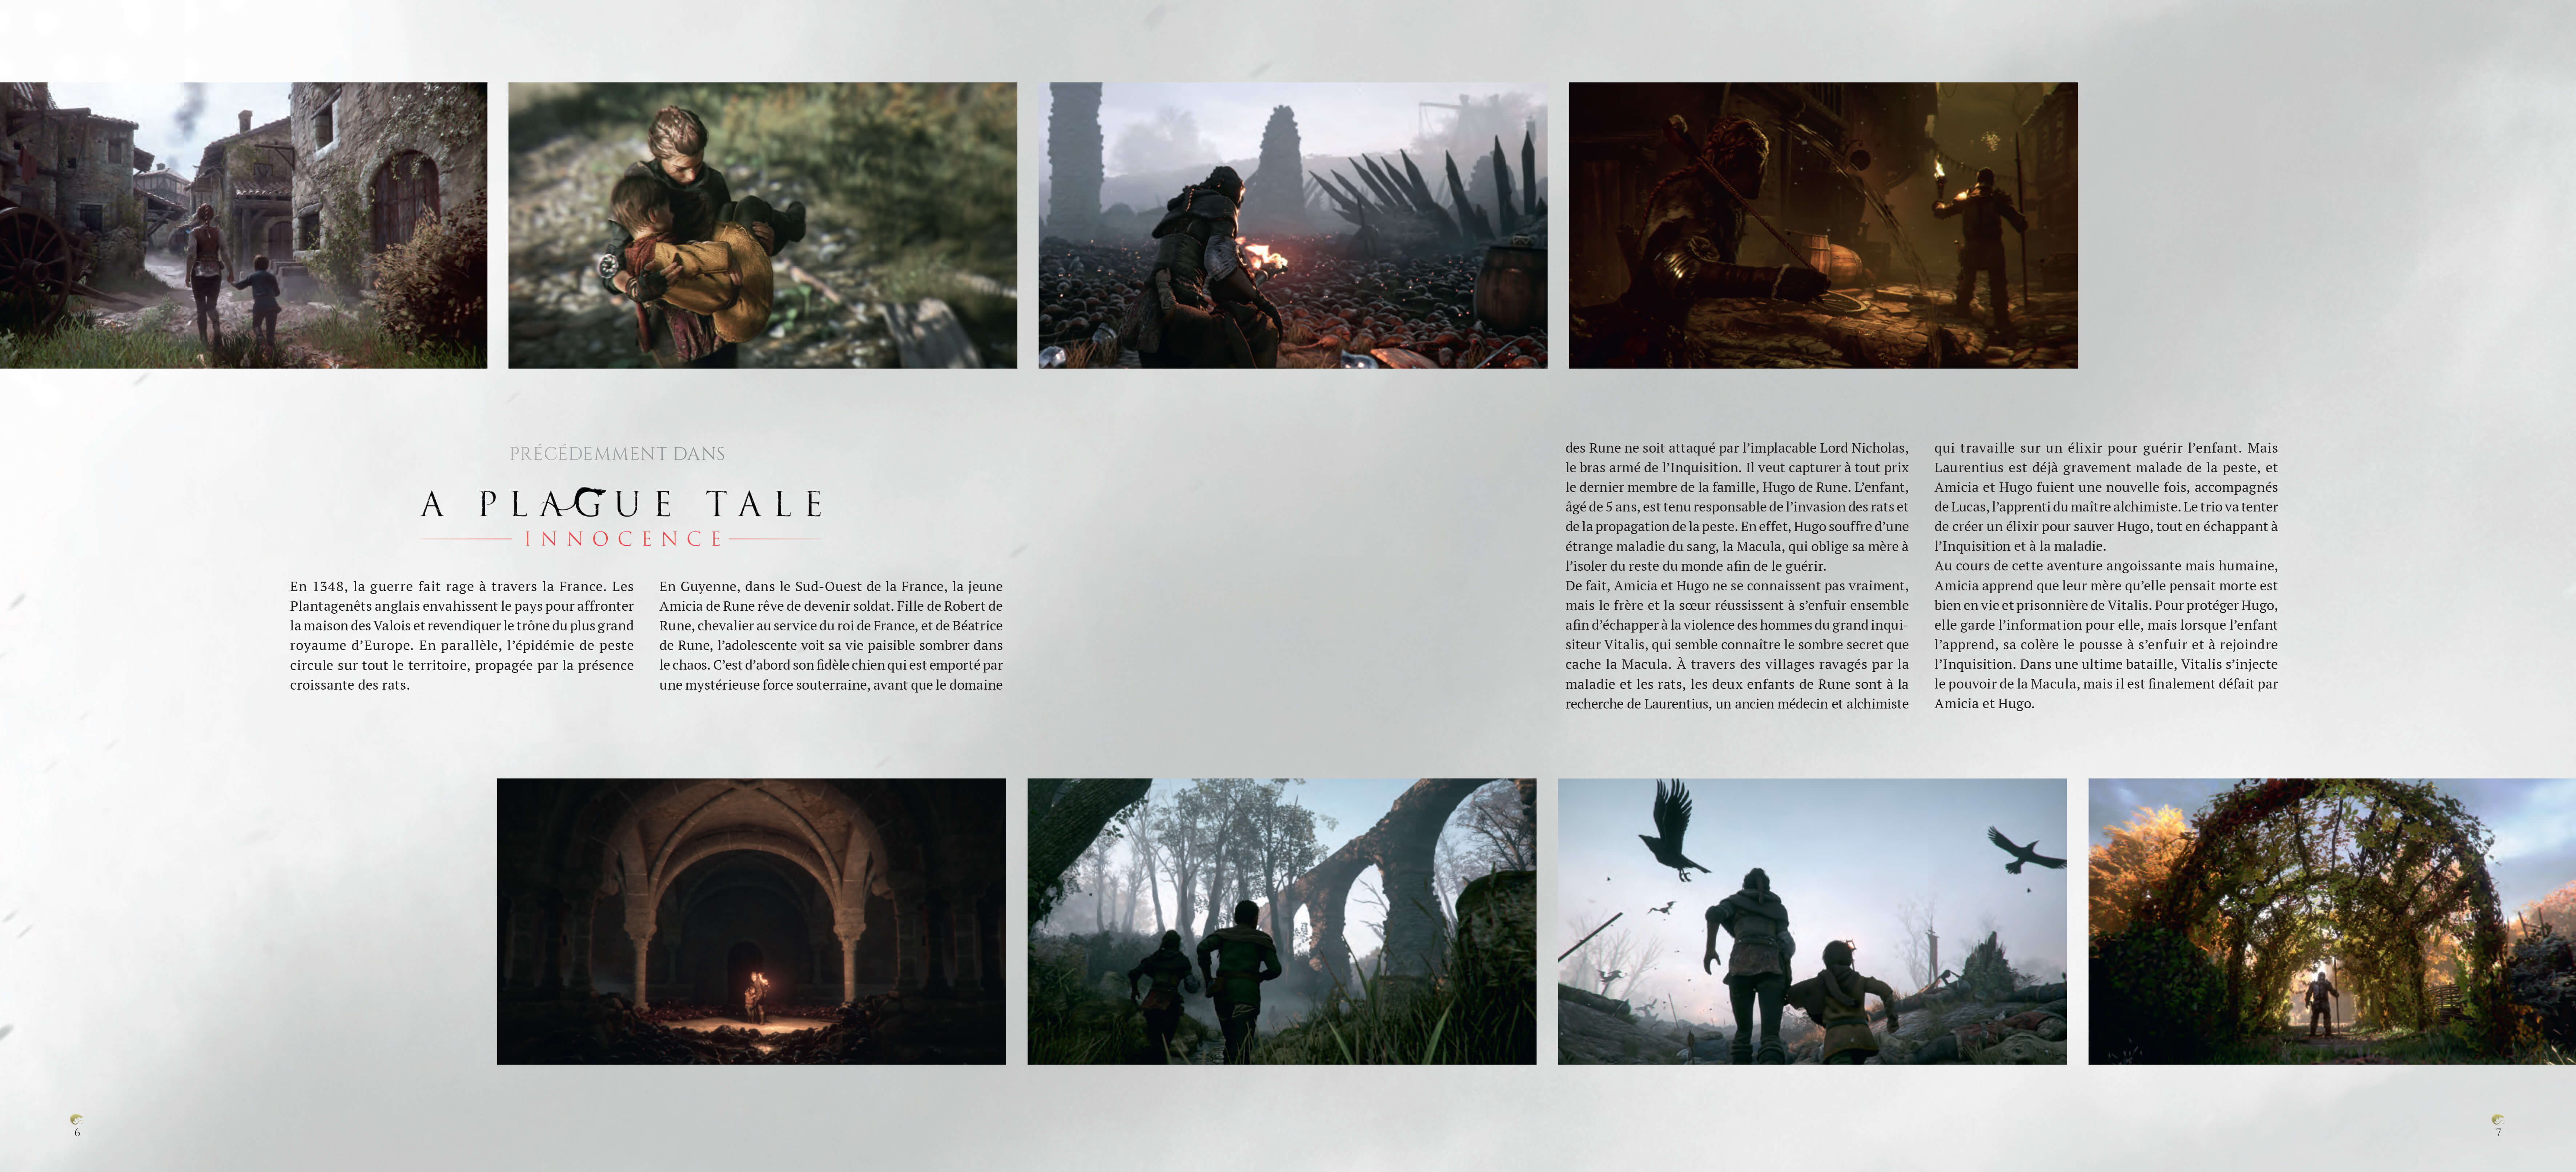 Does anyone have 'The Heart of A Plague Tale. A visual making-of' (limited  first print edition) as well as 'A Plague Tale: Requiem Art Book'  (currently only in French) ??? : r/APlagueTale